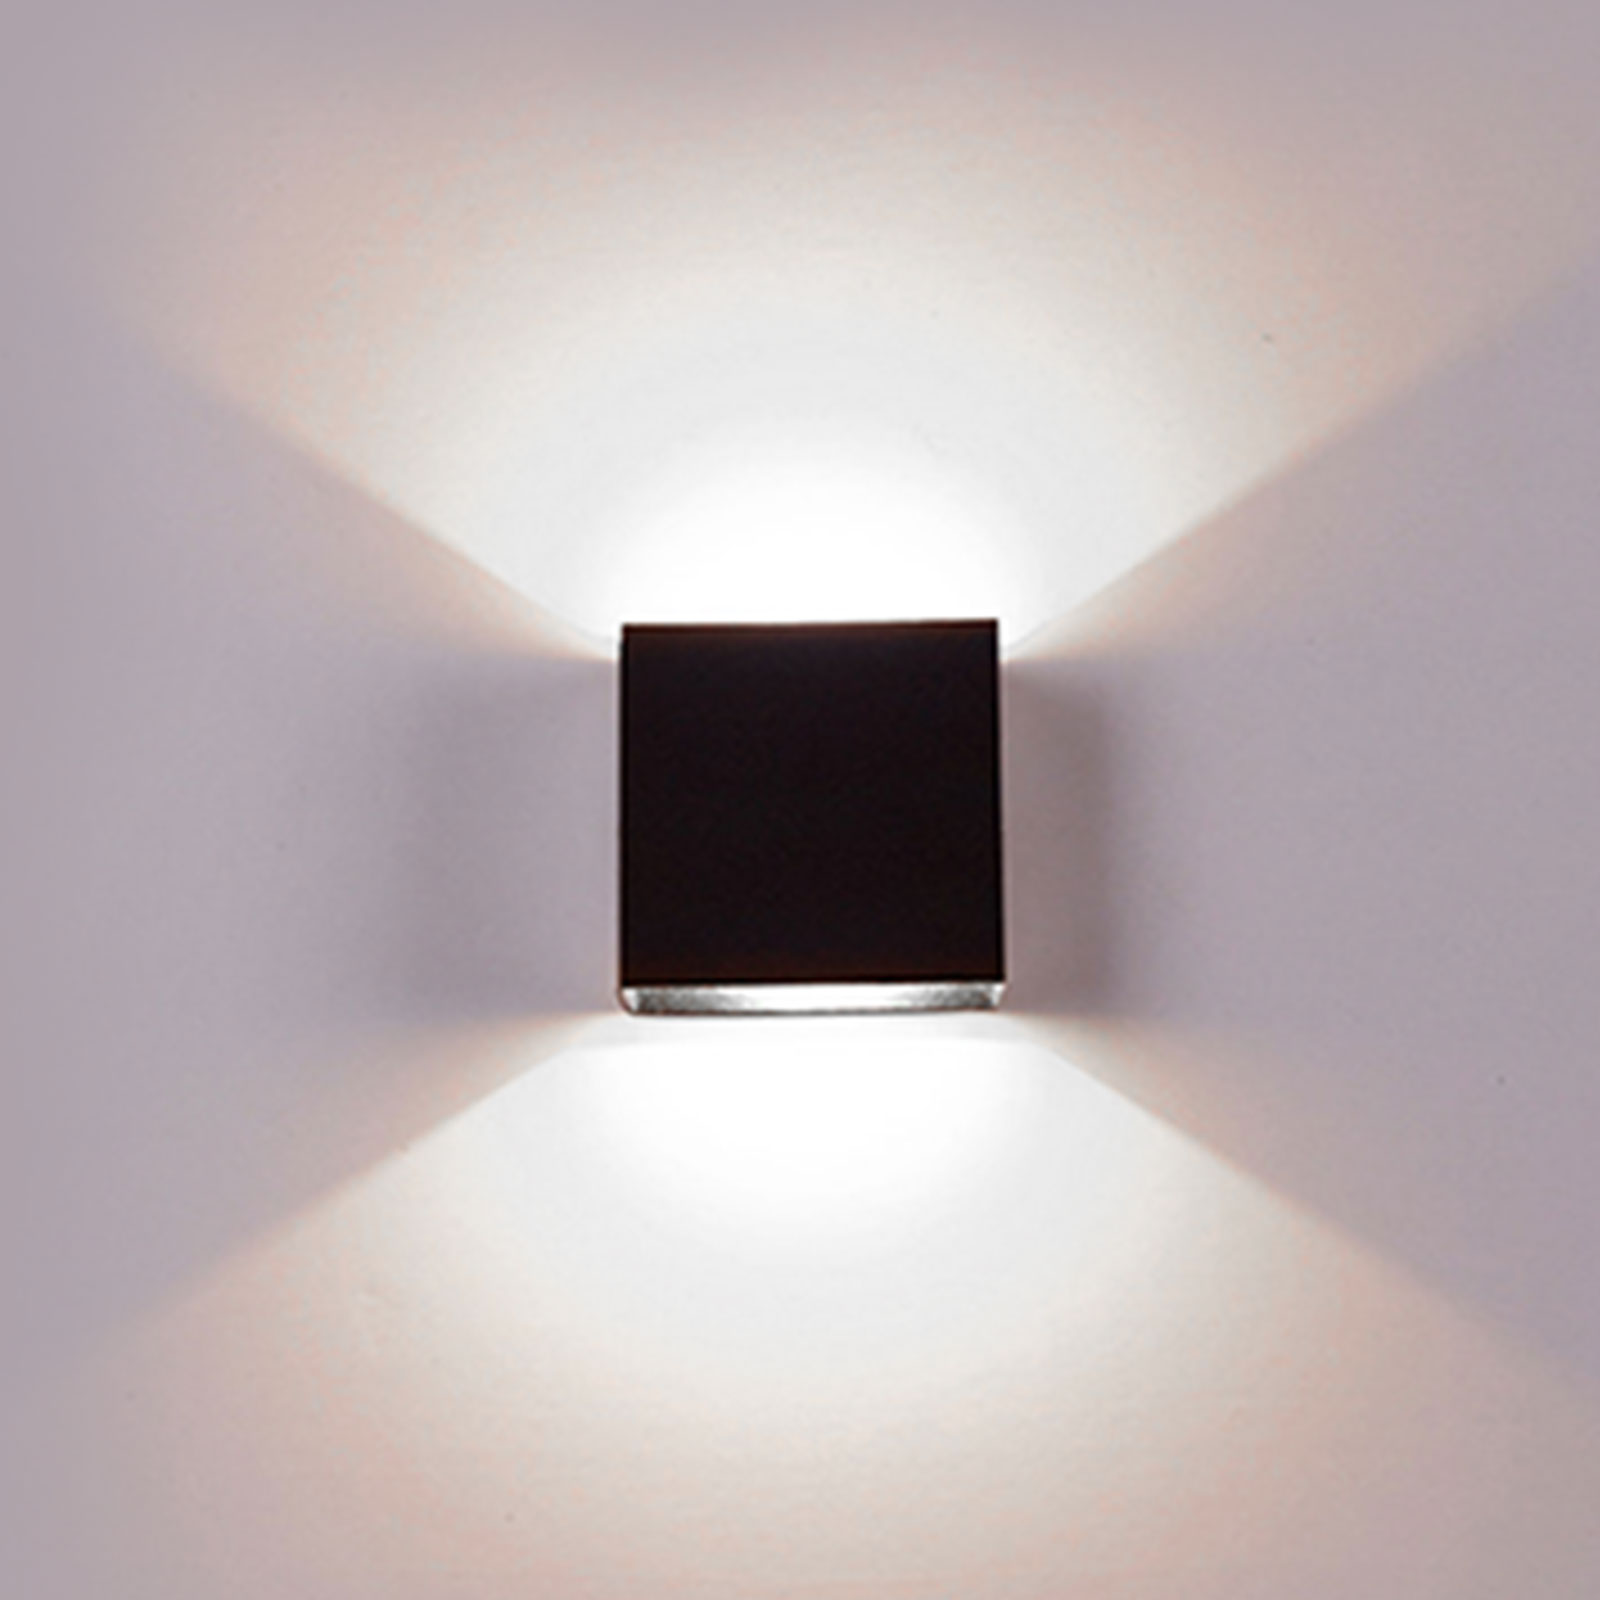 LED Up Down Night Light Cube Wall Lamp Home Indoor Sconce Decor Lighting Fixture